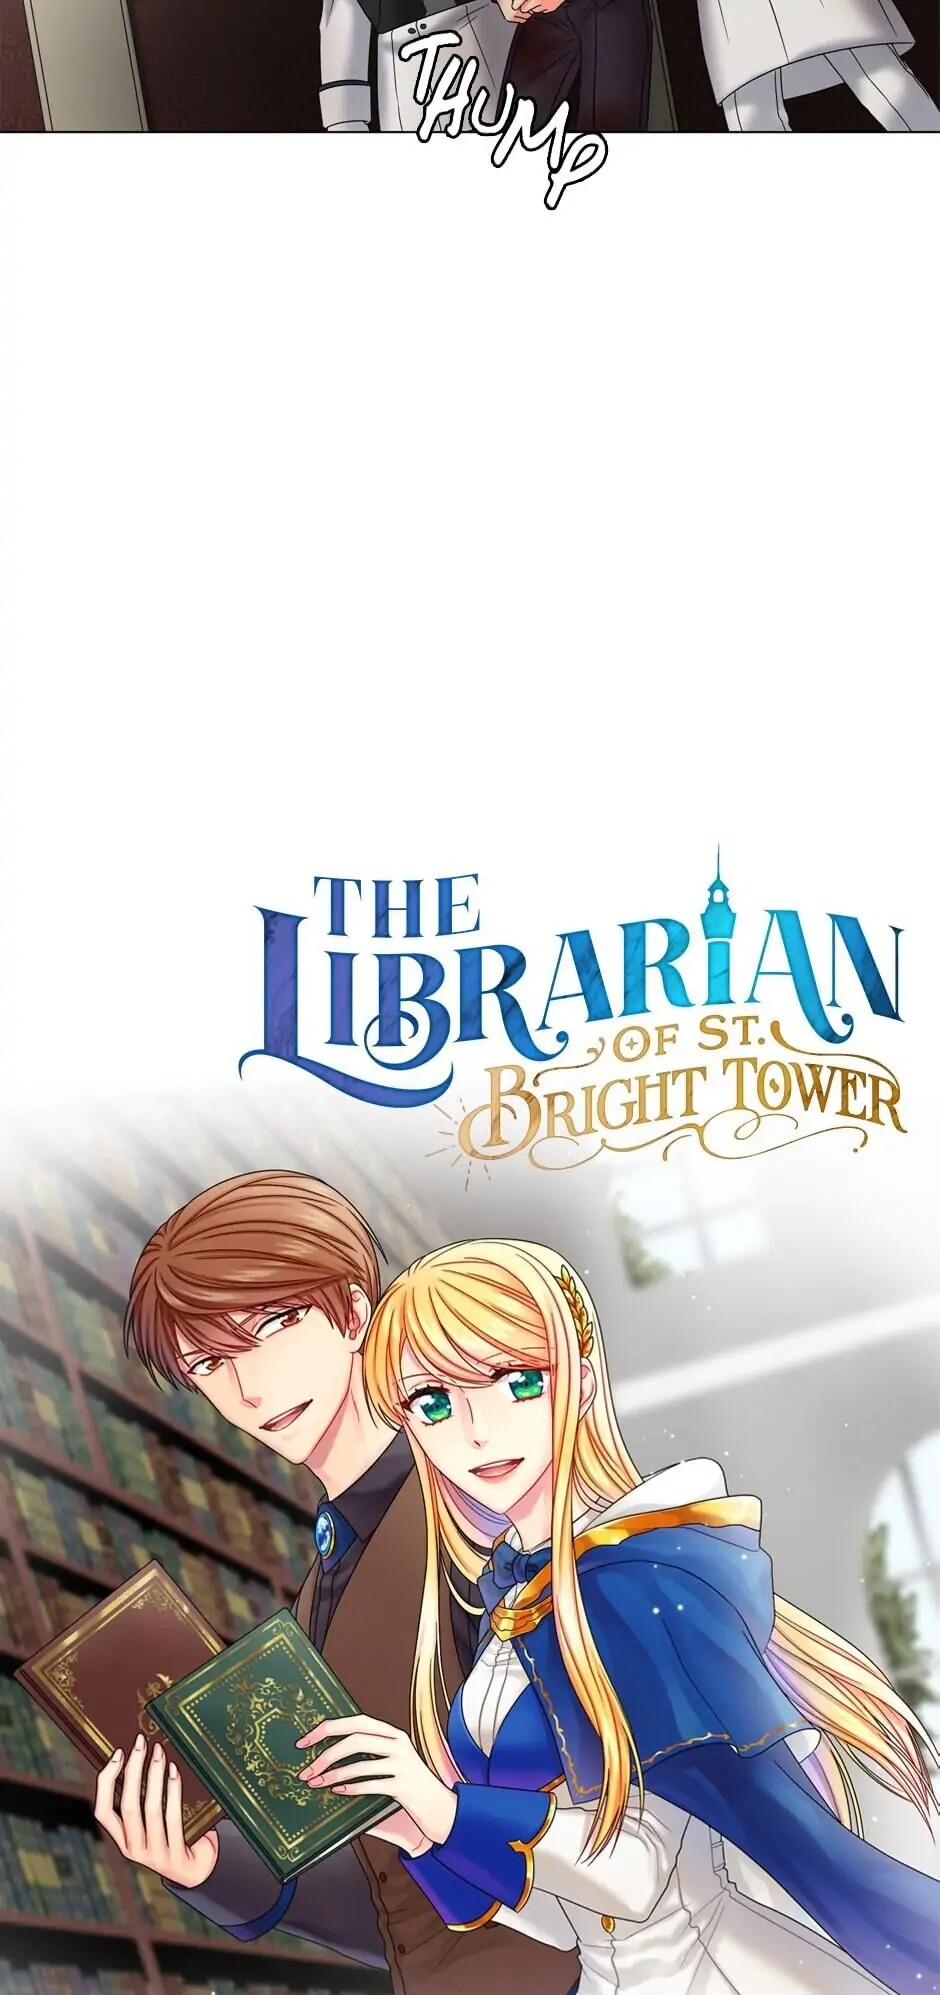 The Magic Tower Librarian chapter 4